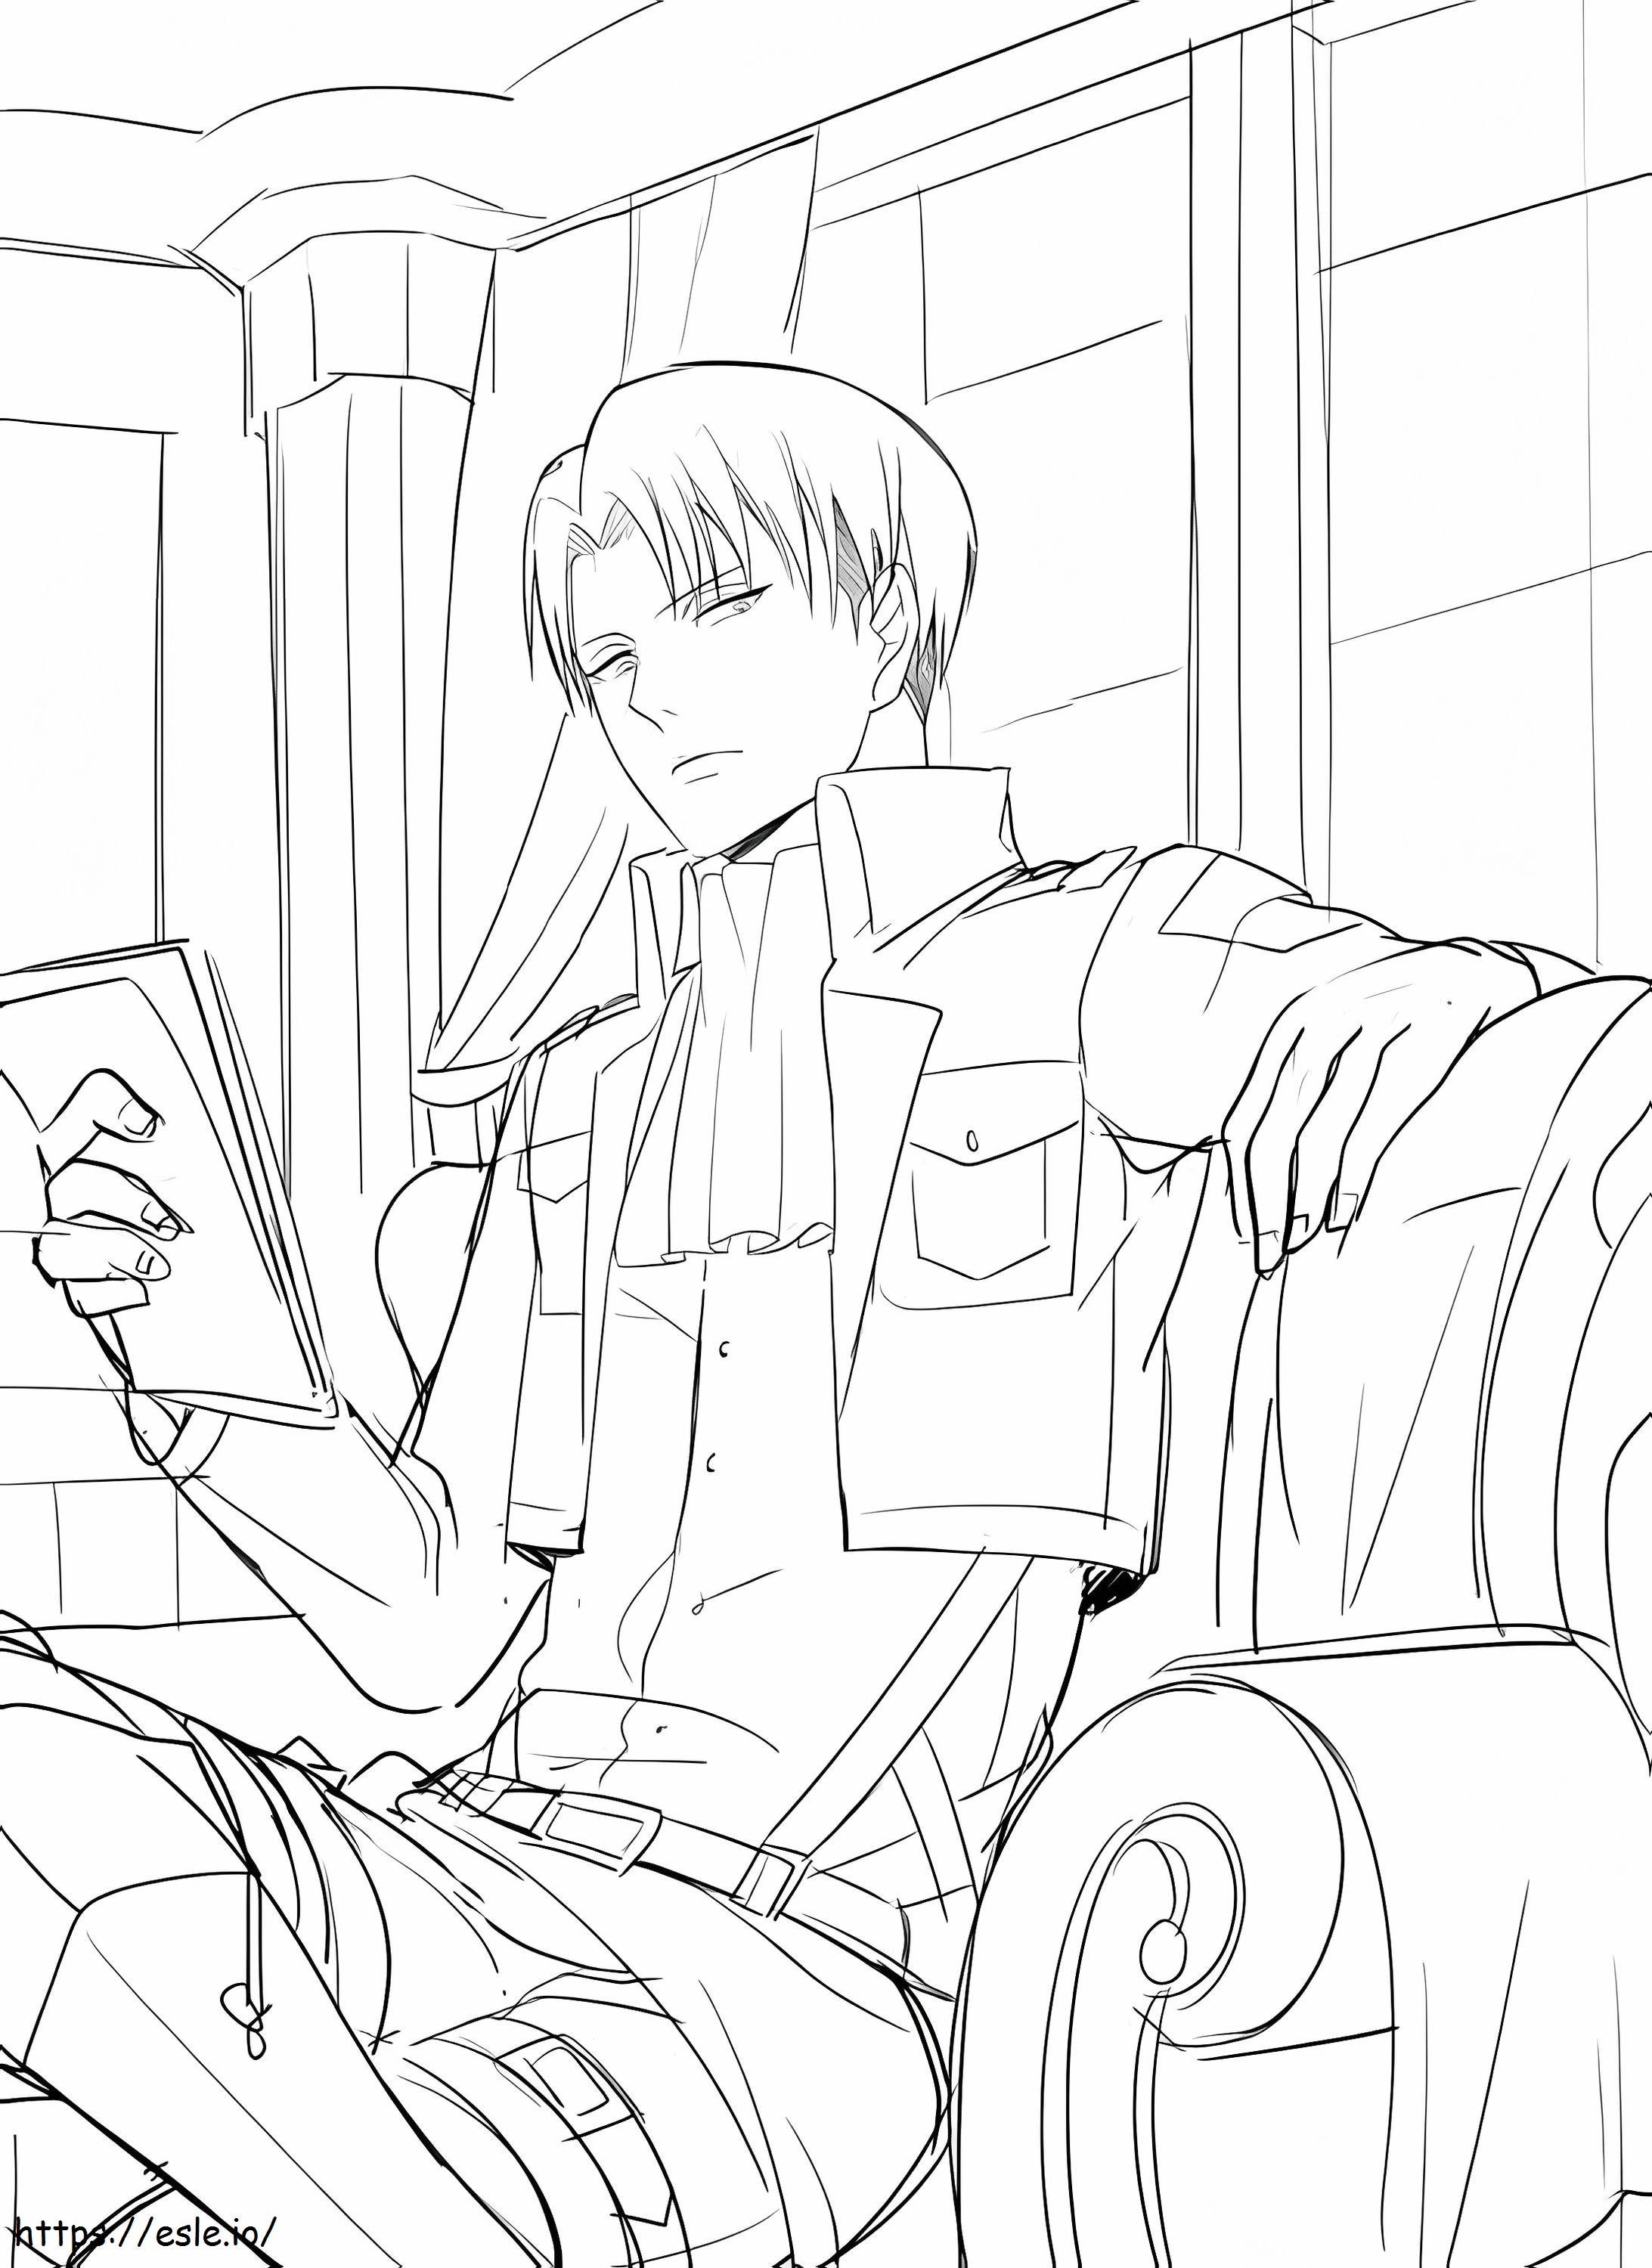 Levi Reading Book coloring page